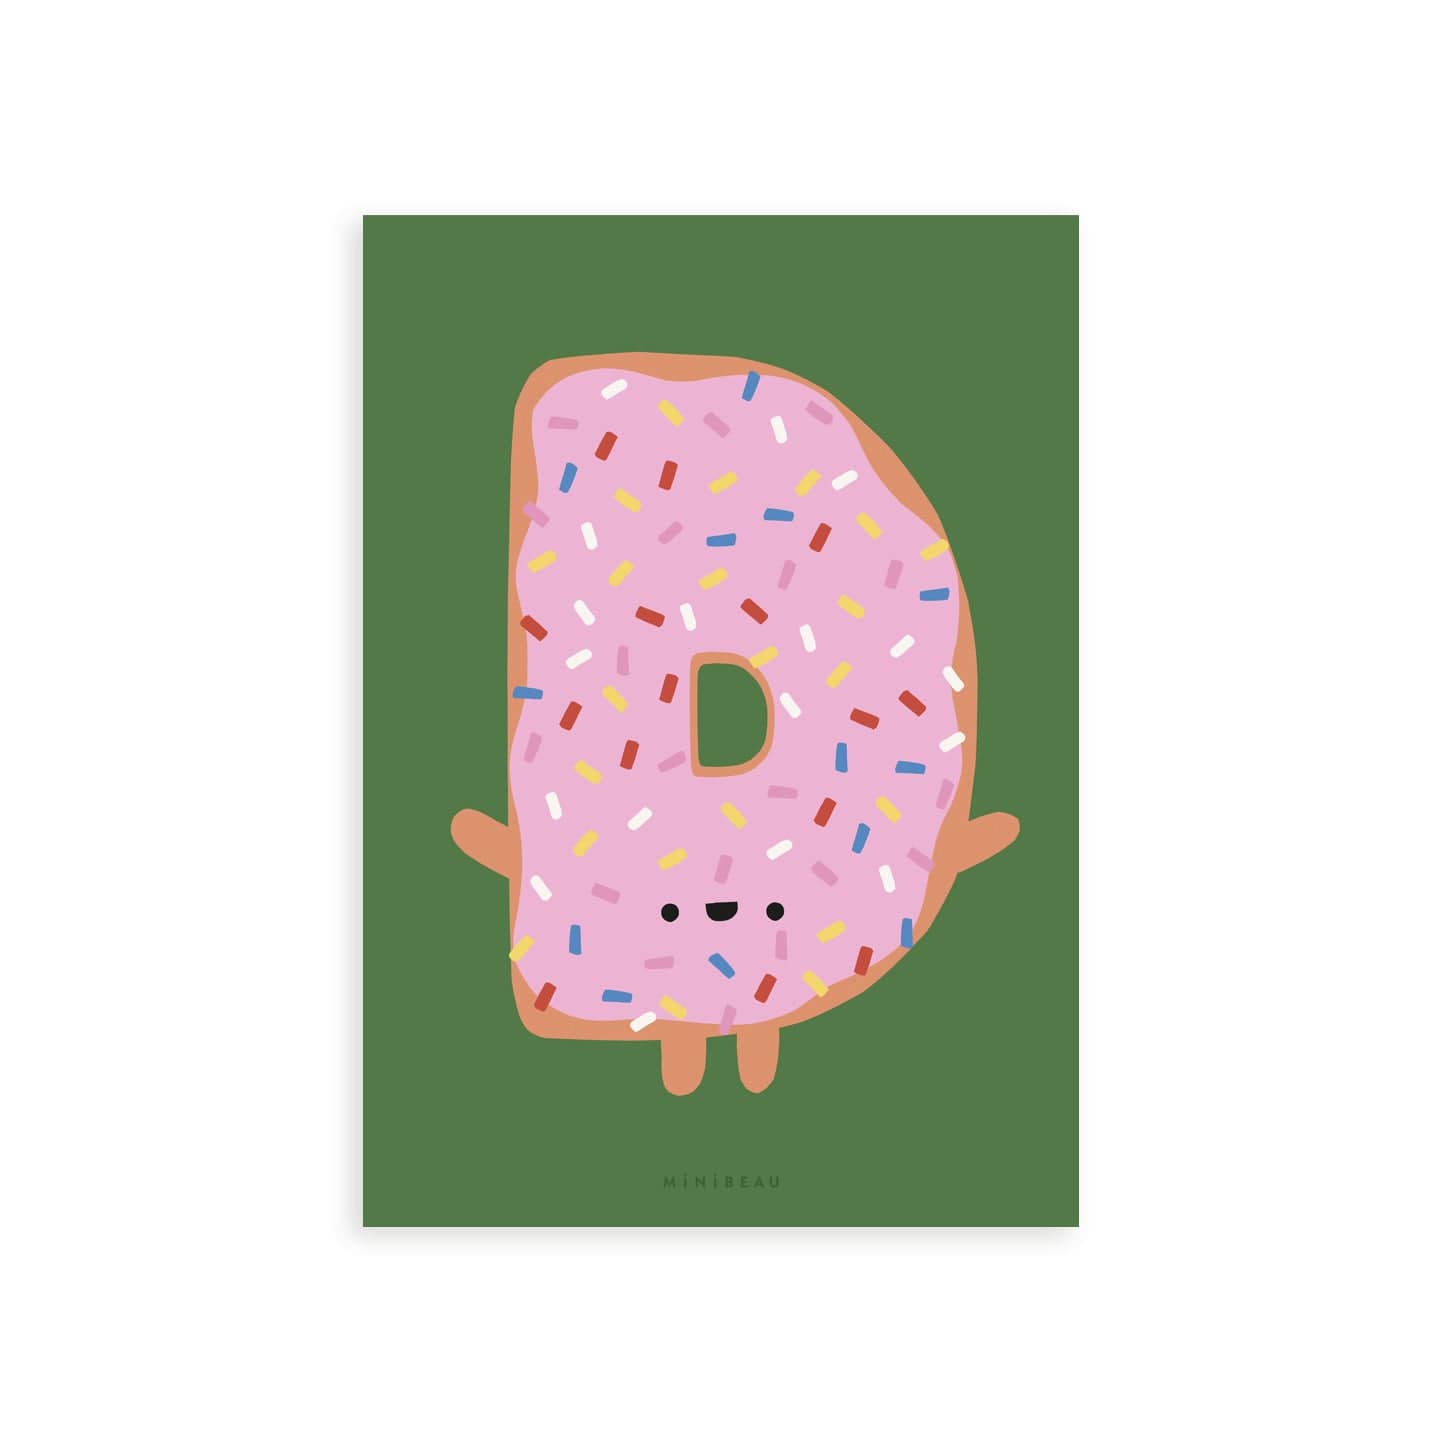 Our Happy Alphabet 'D' Art Print shows a doughtnut smiling iced doughnut in the shape of a D with short arms and legs. Icing is pink with multicoloured sprinkles and the print background is green.